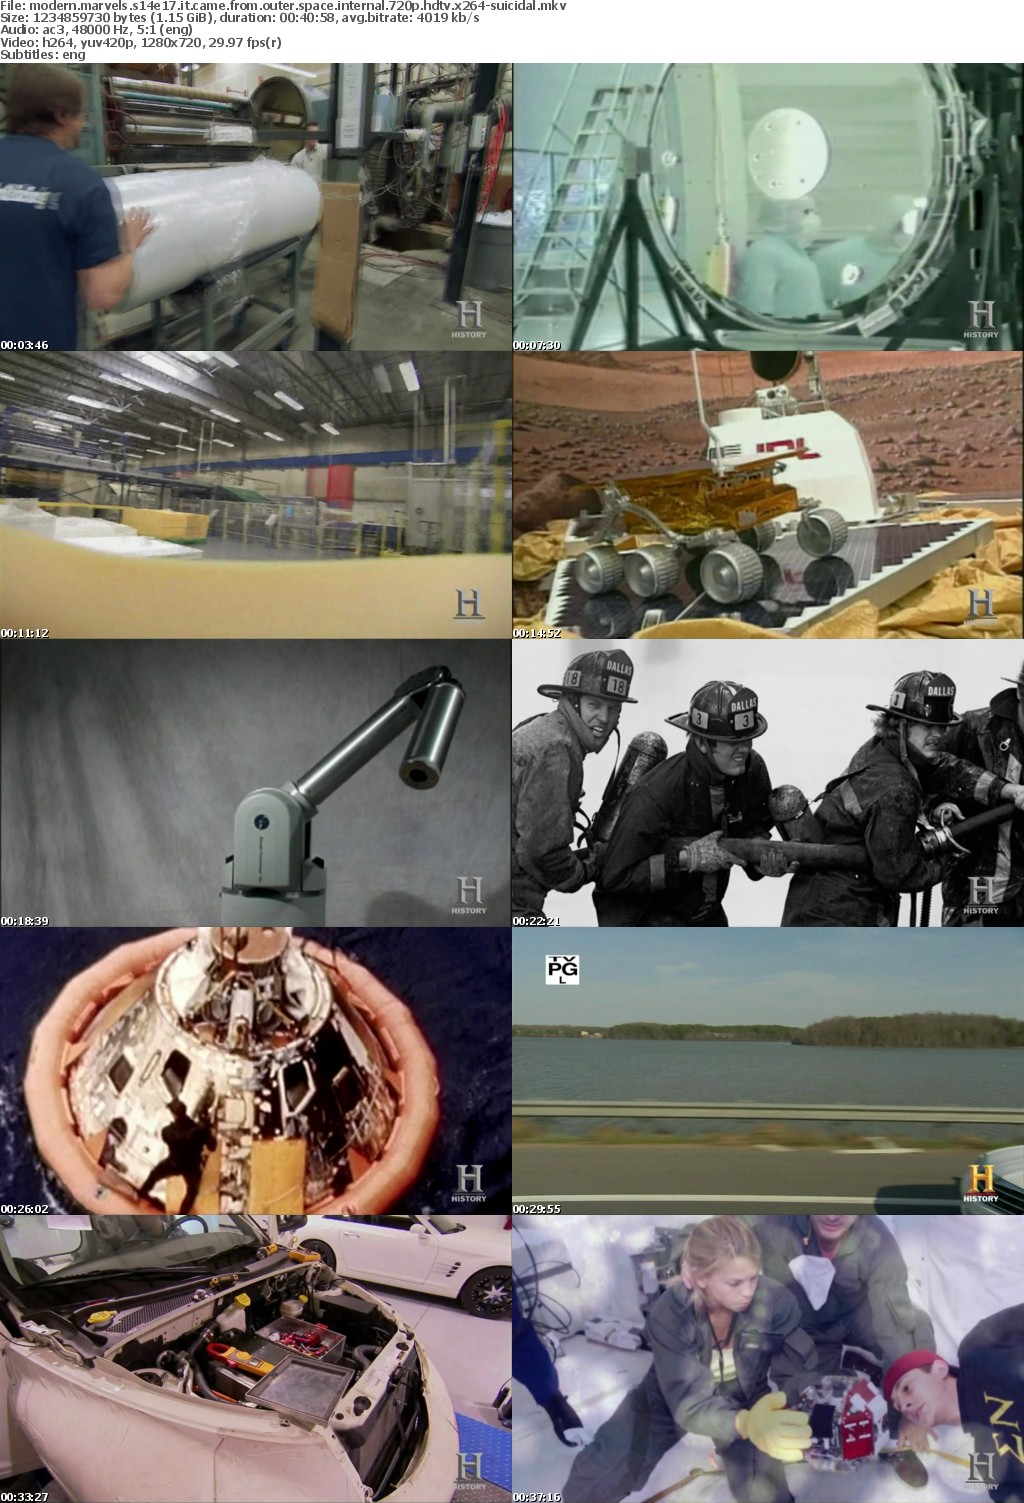 Modern Marvels S14E17 It Came From Outer Space iNTERNAL 720p HDTV x264-SUiCiDAL